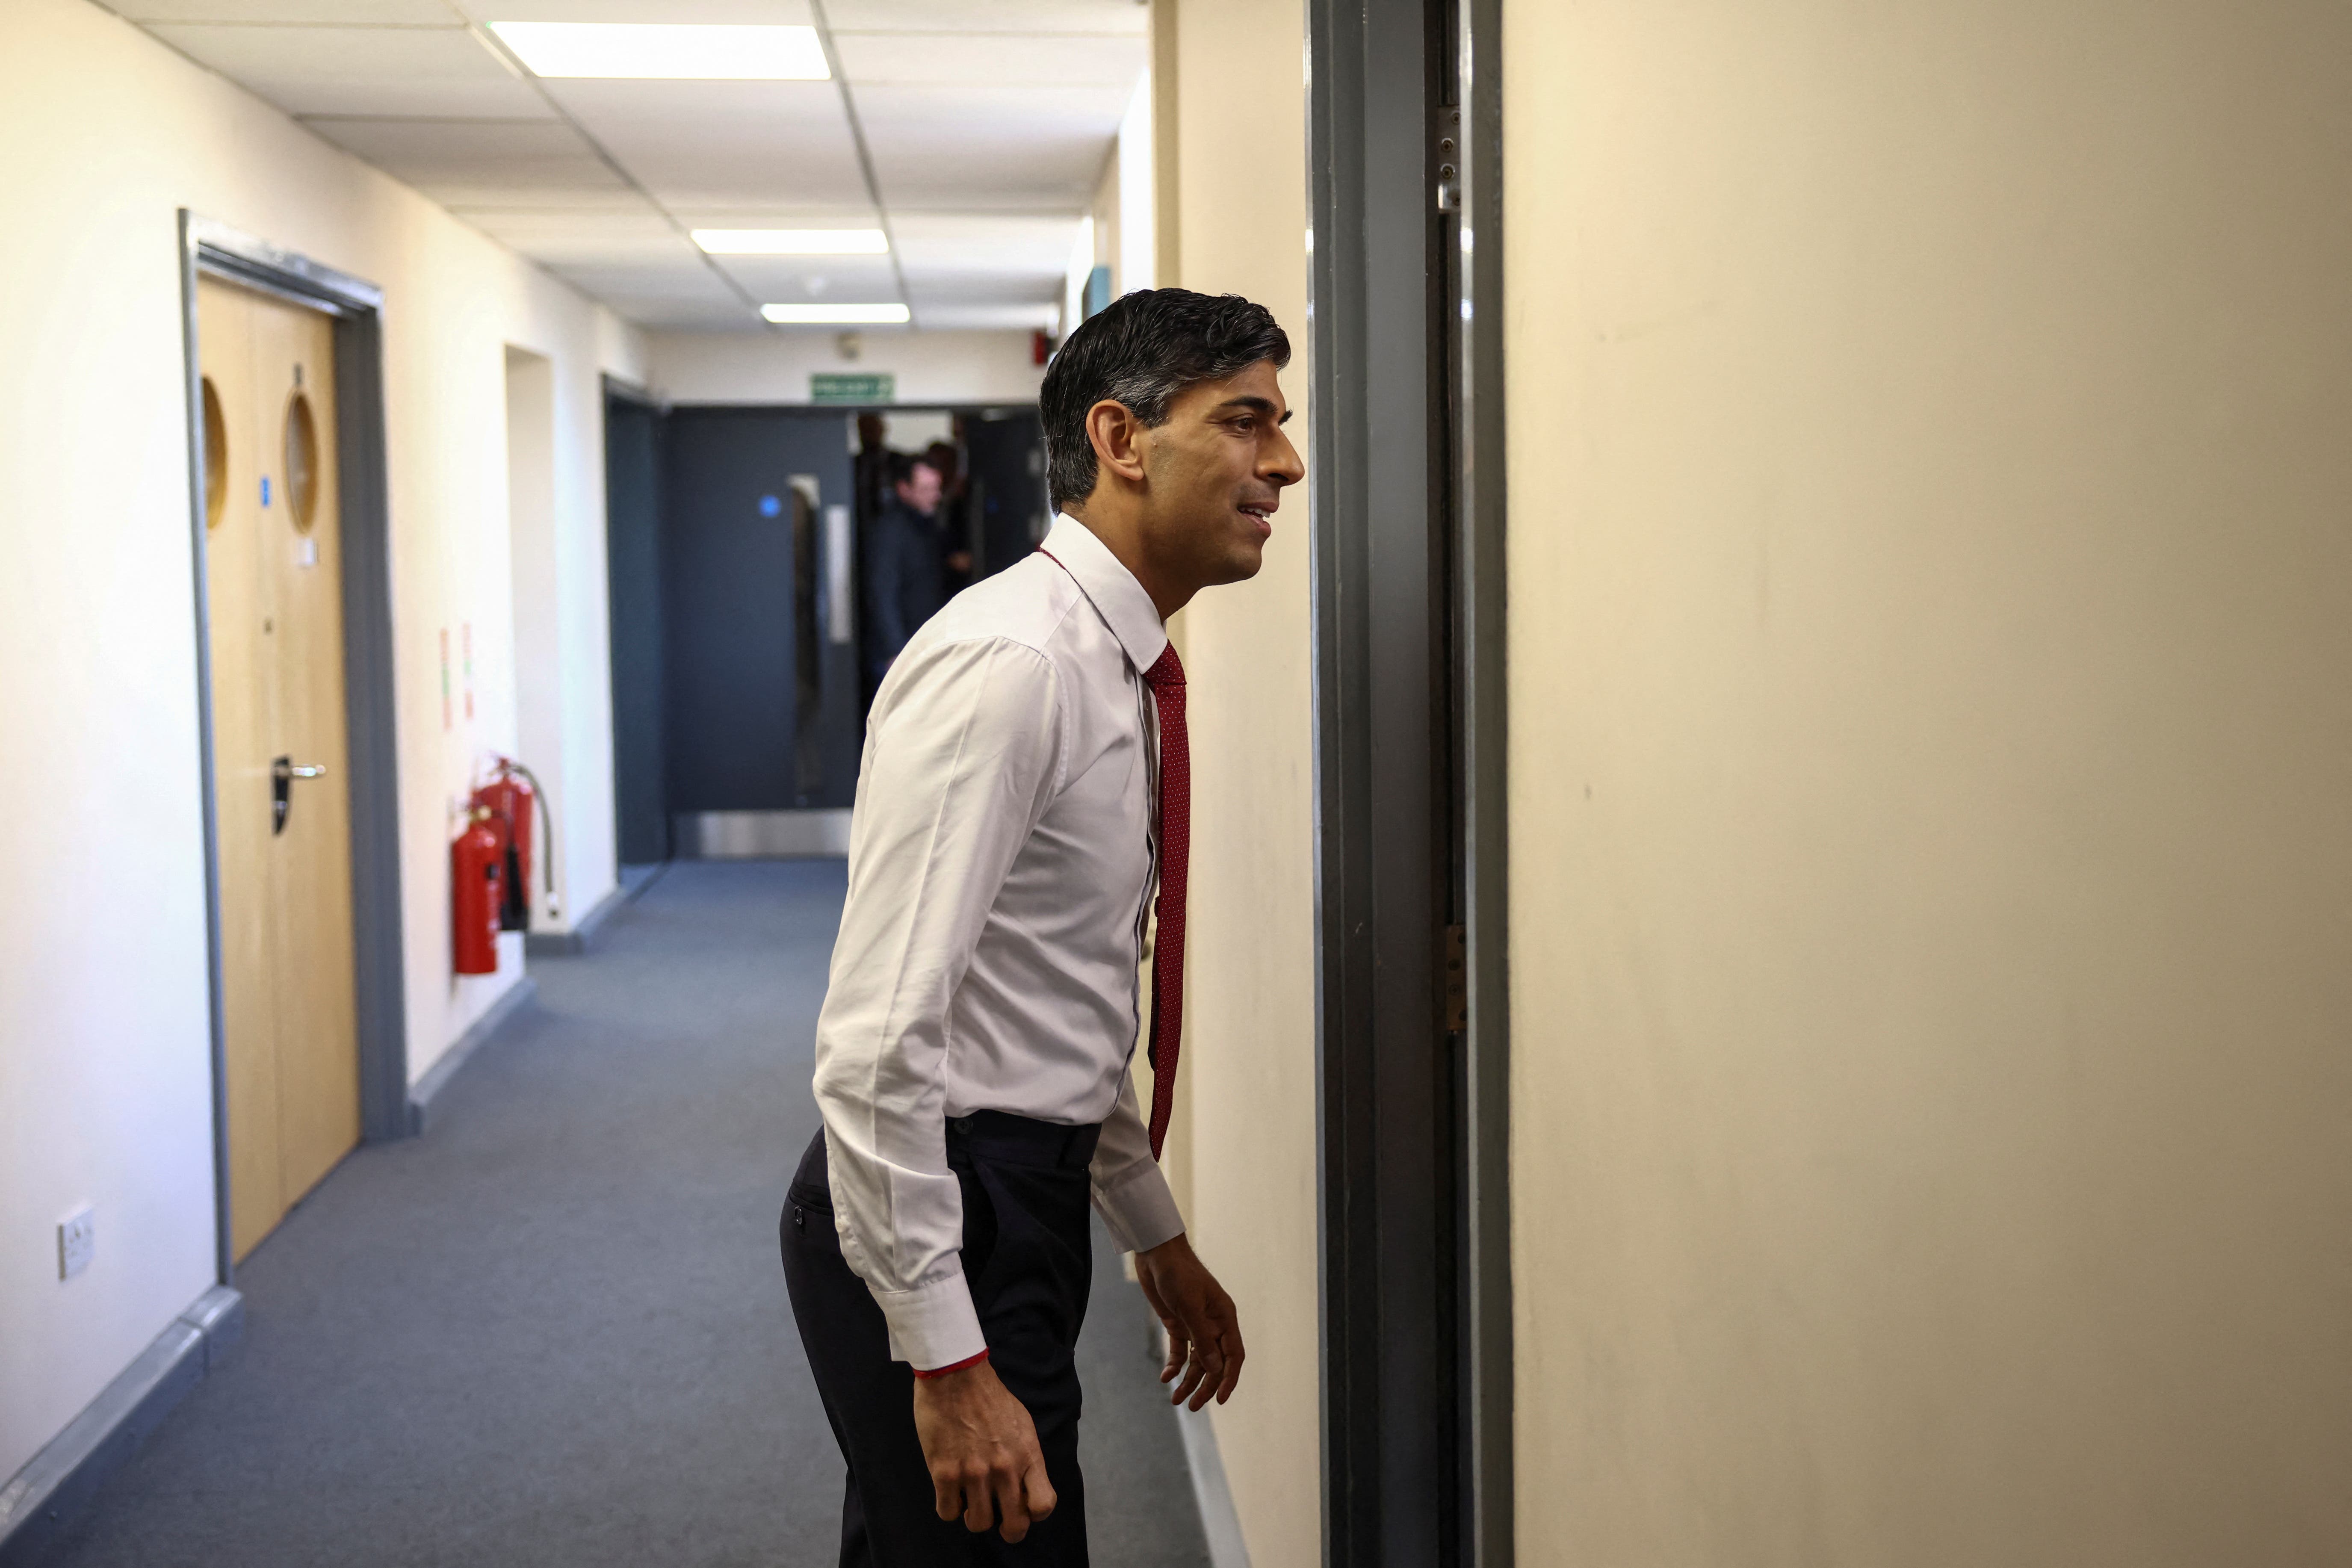 Prime Minister Rishi Sunak will meet with health care leaders in No 10 on Saturday (Henry Nicholls/PA)